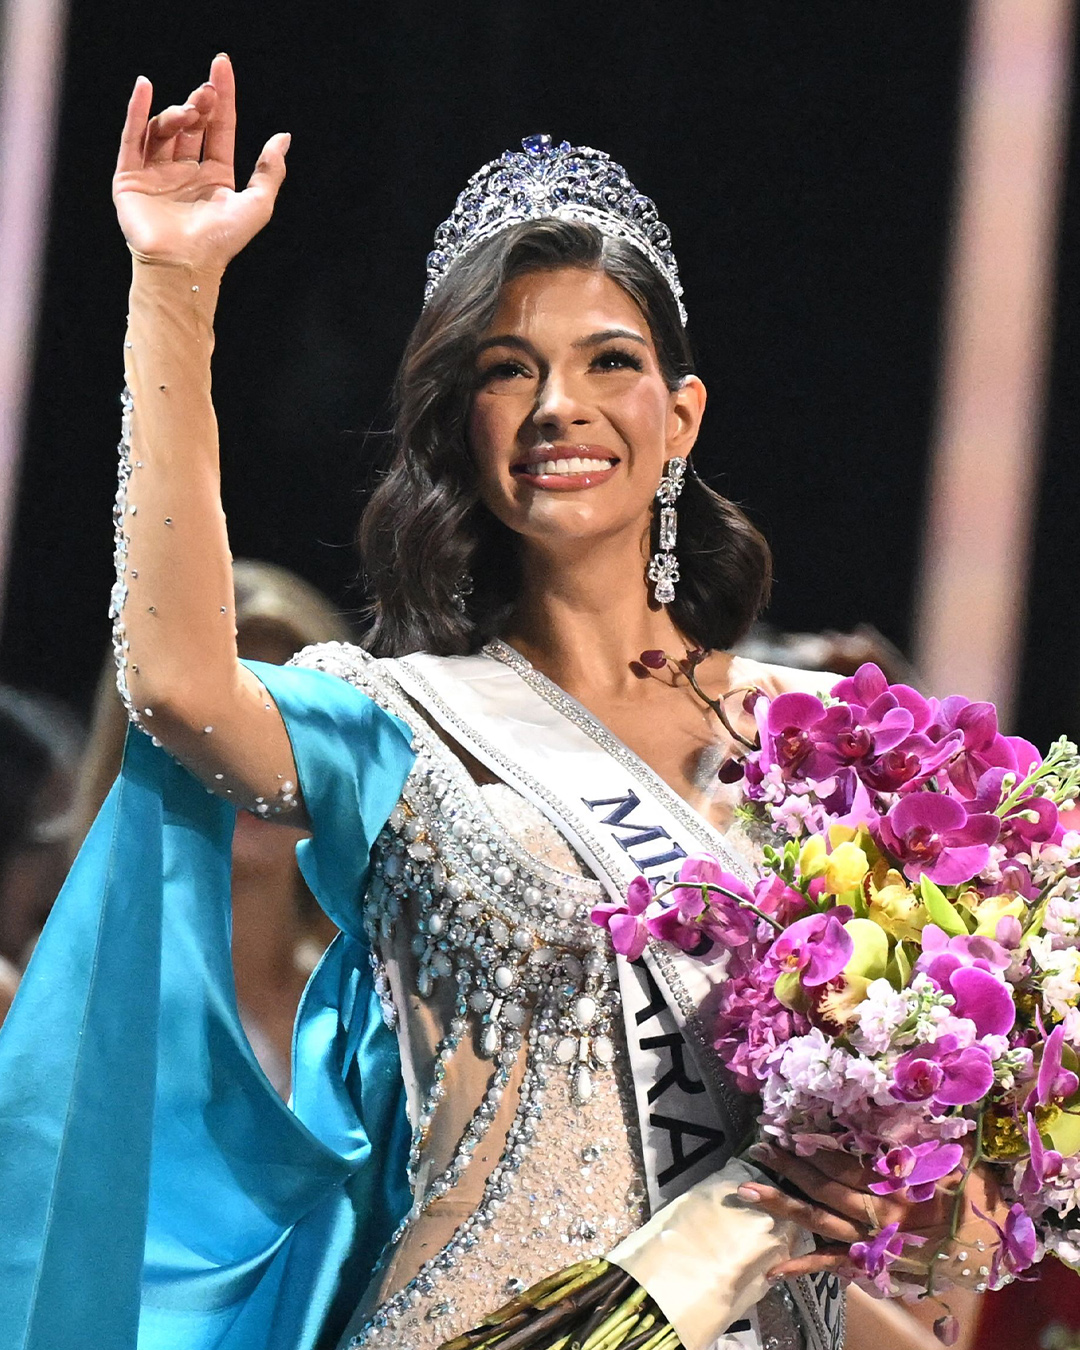 Everything You Need to Know About the Miss Universe Diamond Crowns